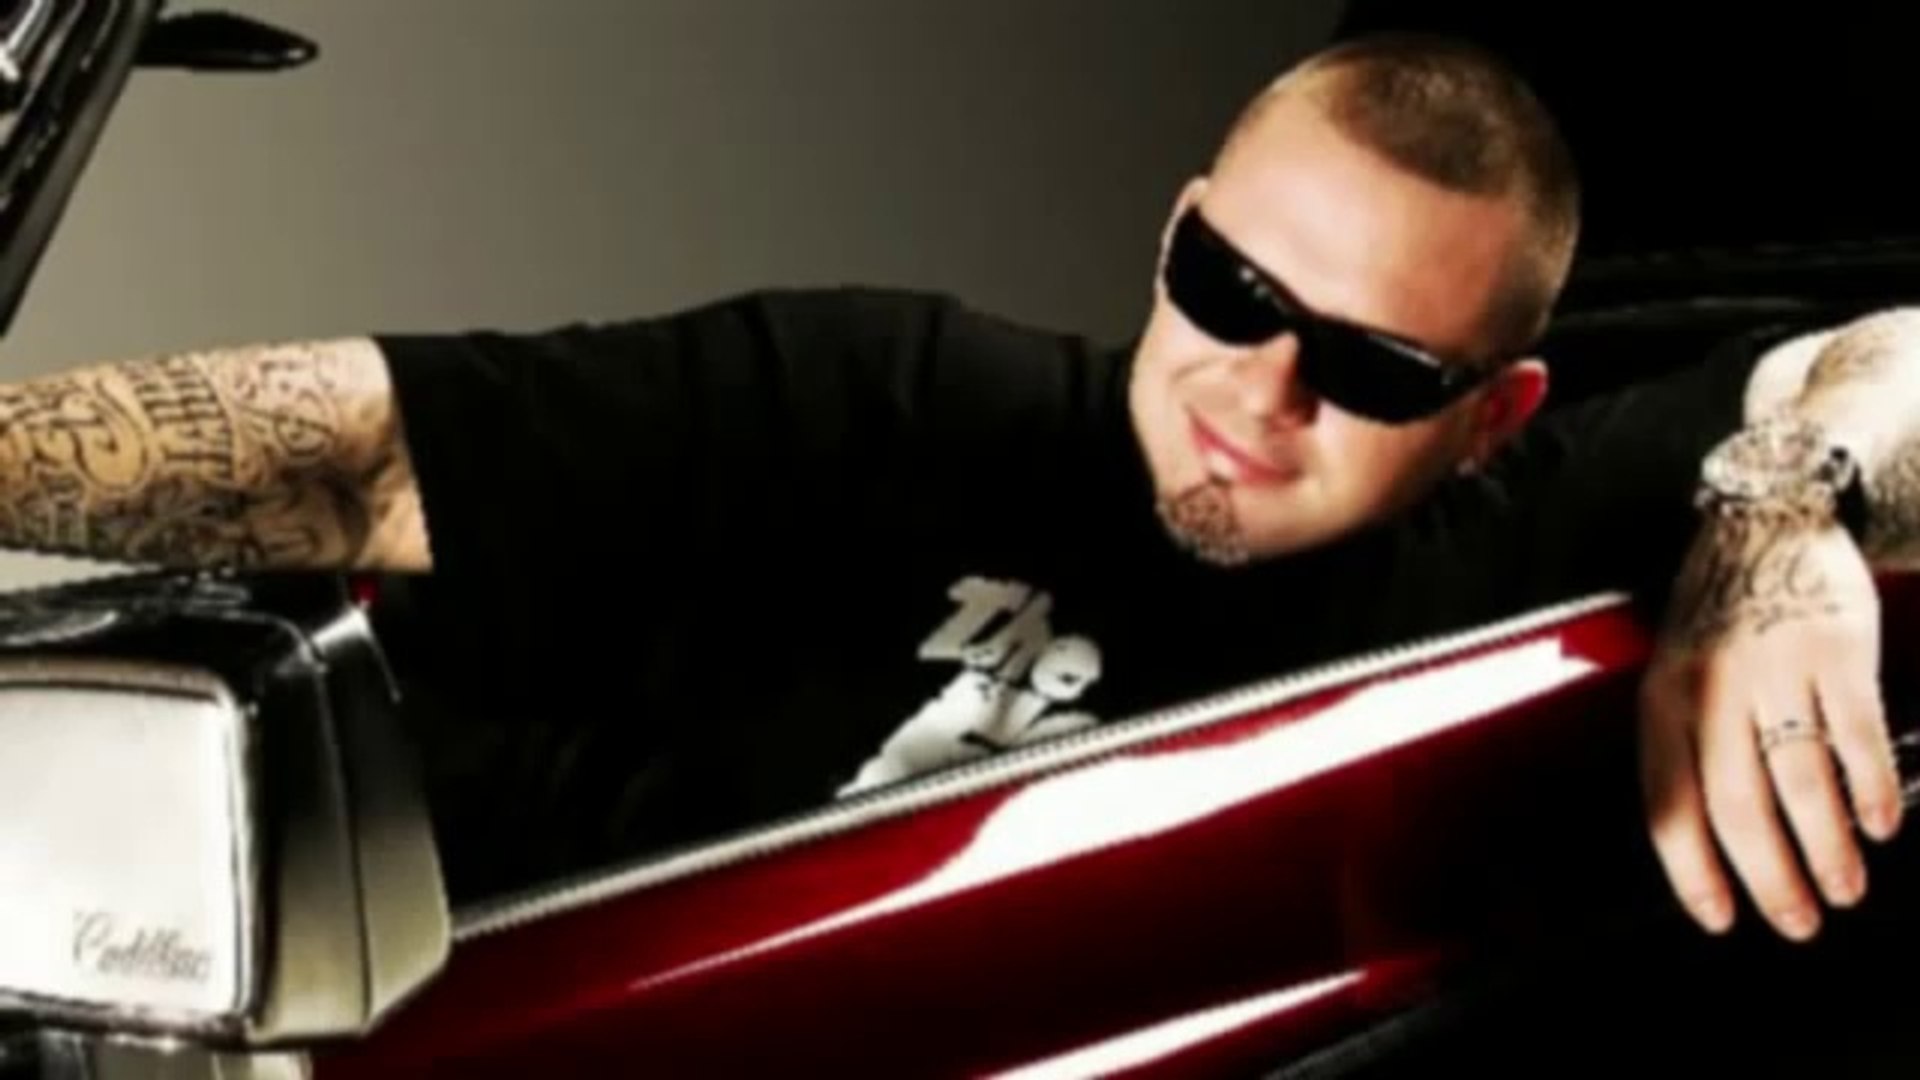 Paul Wall Ft. Devin The Dude - Smoke Weed Everyday - Vidéo Dailymotion